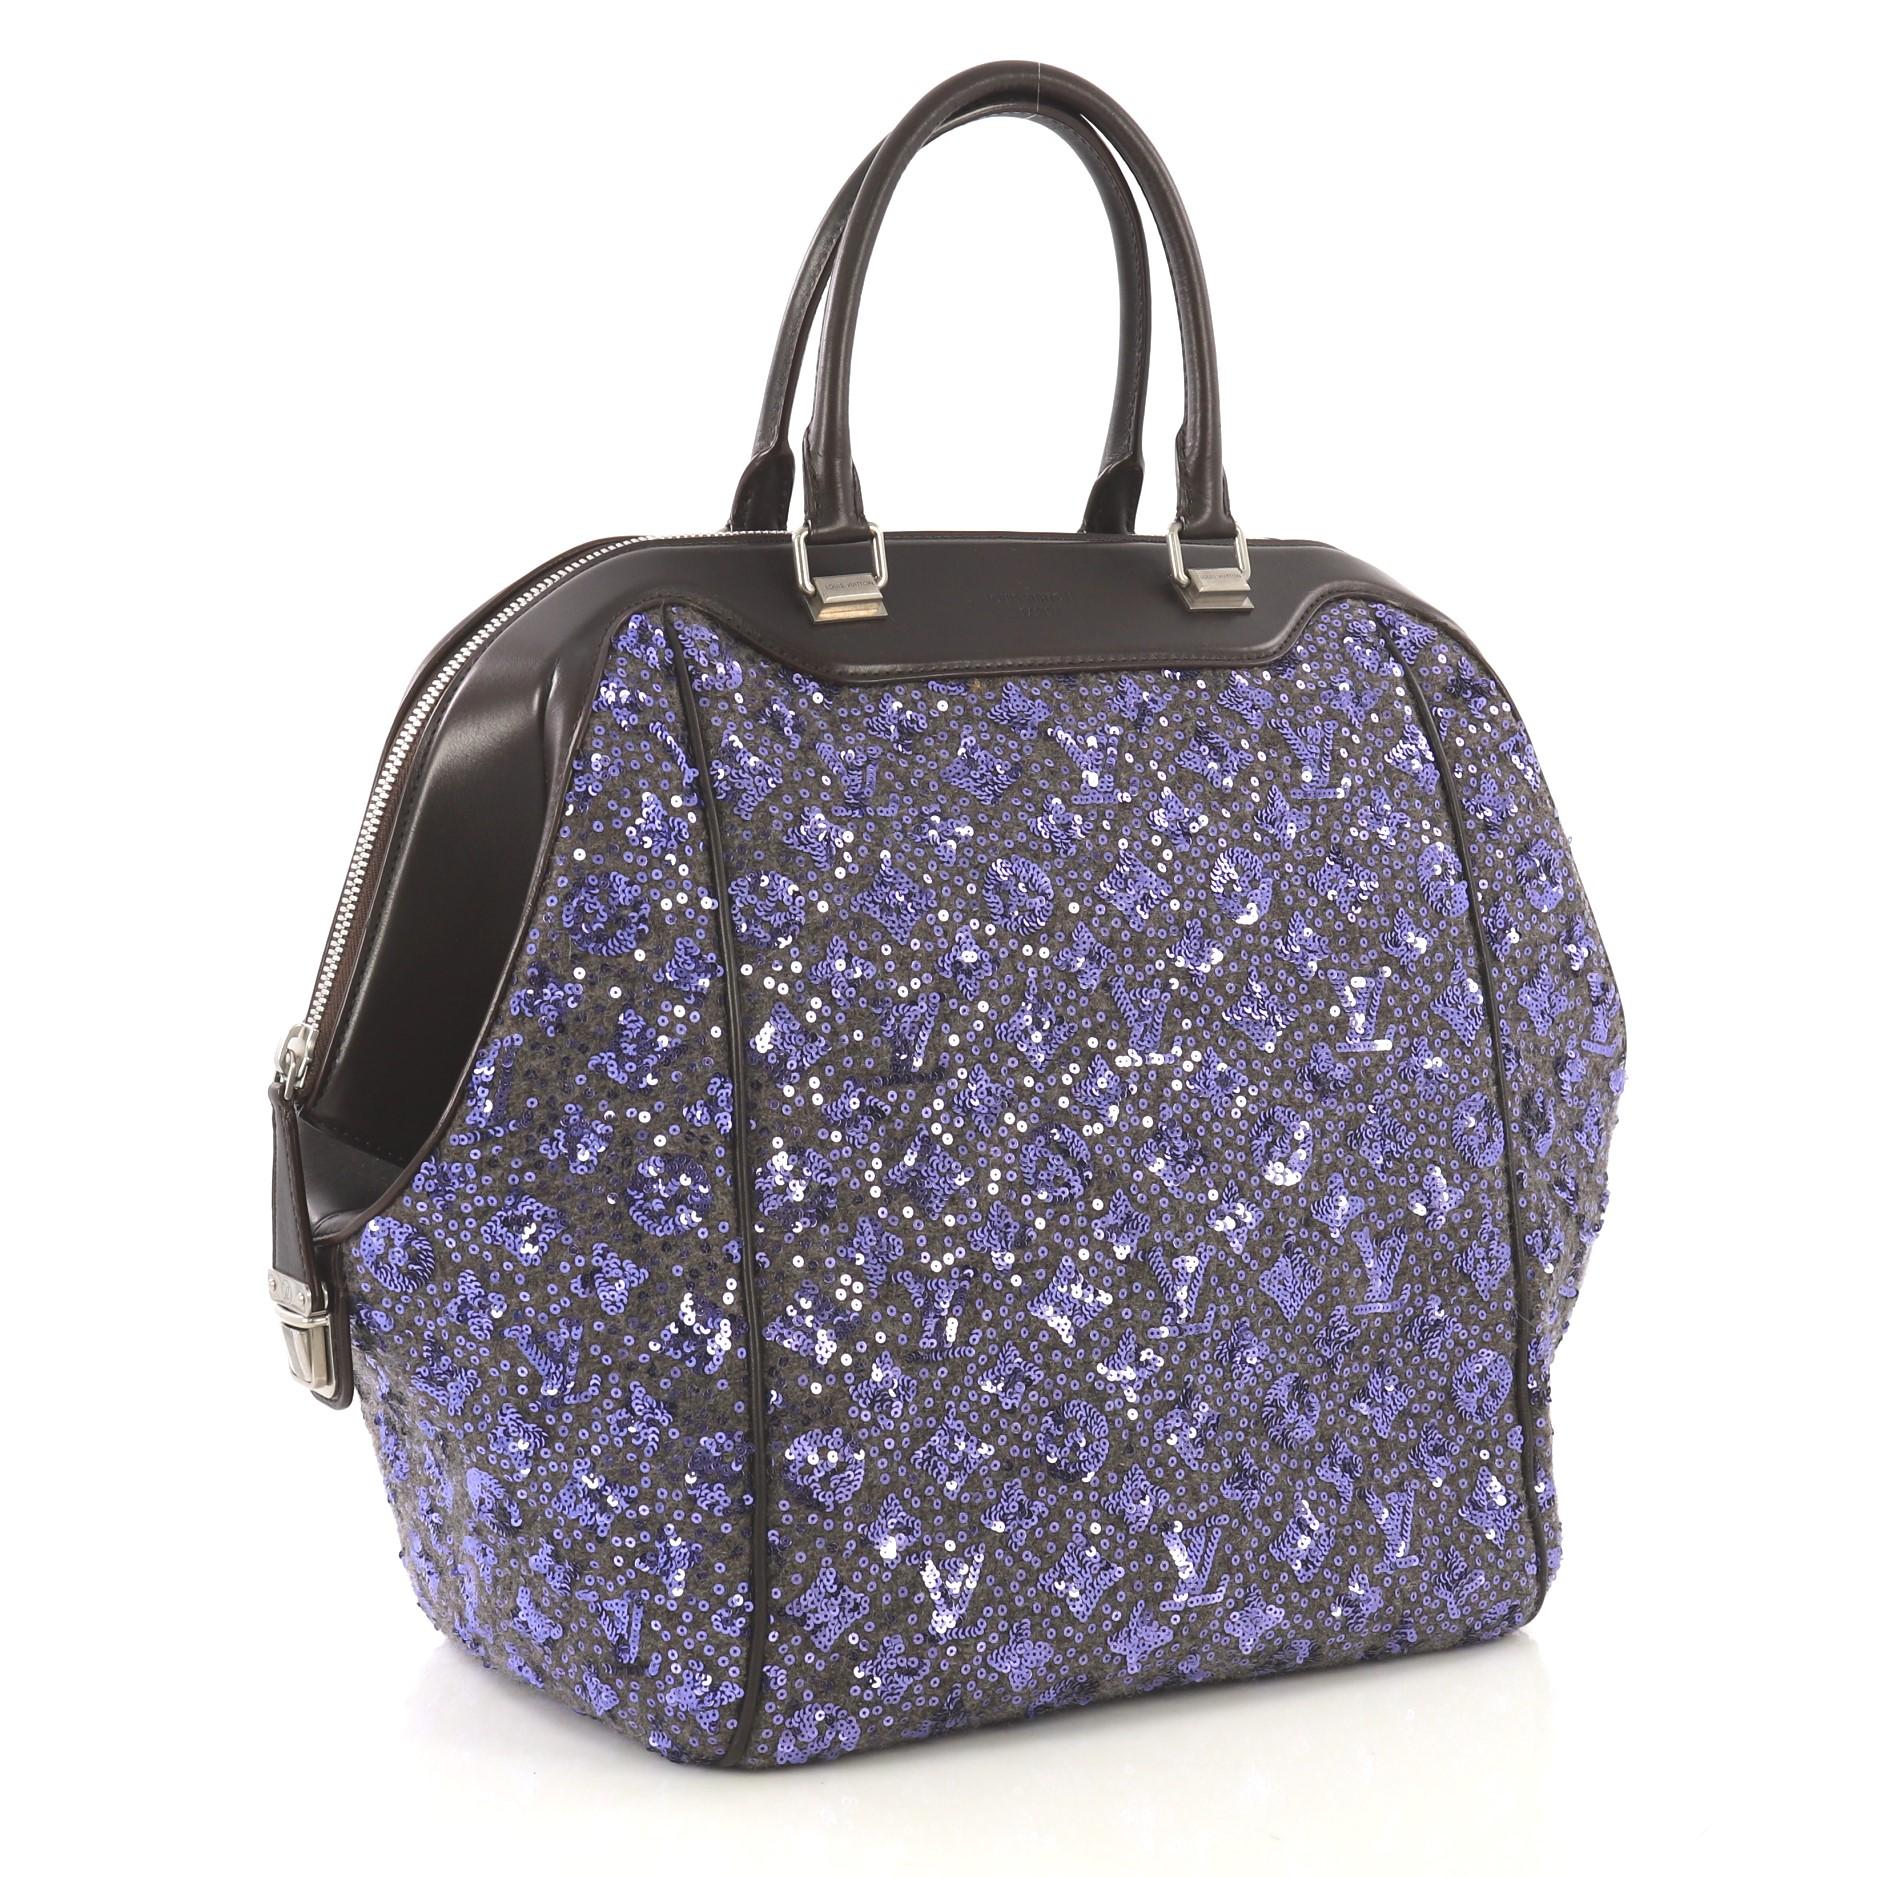 This Louis Vuitton North South Bag Limited Edition Sunshine Express, crafted from purple sequin-embroidered wool with monogram pattern, features dual rolled leather handles, leather trim, and matte silver-tone hardware. Its zip closure with